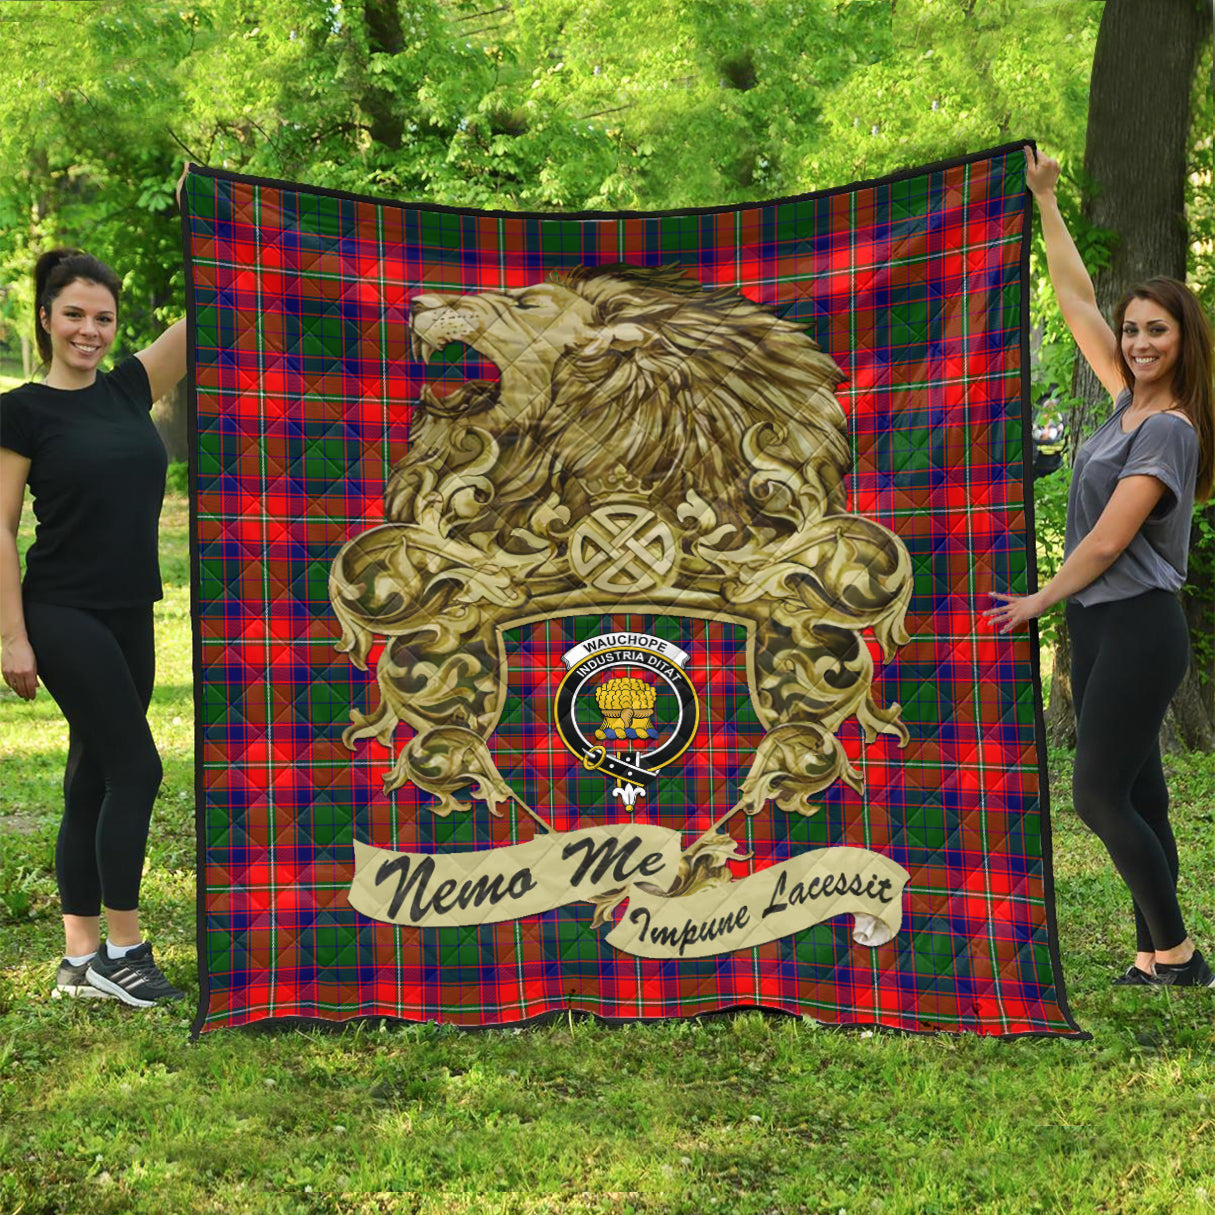 wauchope-tartan-quilt-with-motto-nemo-me-impune-lacessit-with-vintage-lion-family-crest-tartan-quilt-pattern-scottish-tartan-plaid-quilt-vintage-style